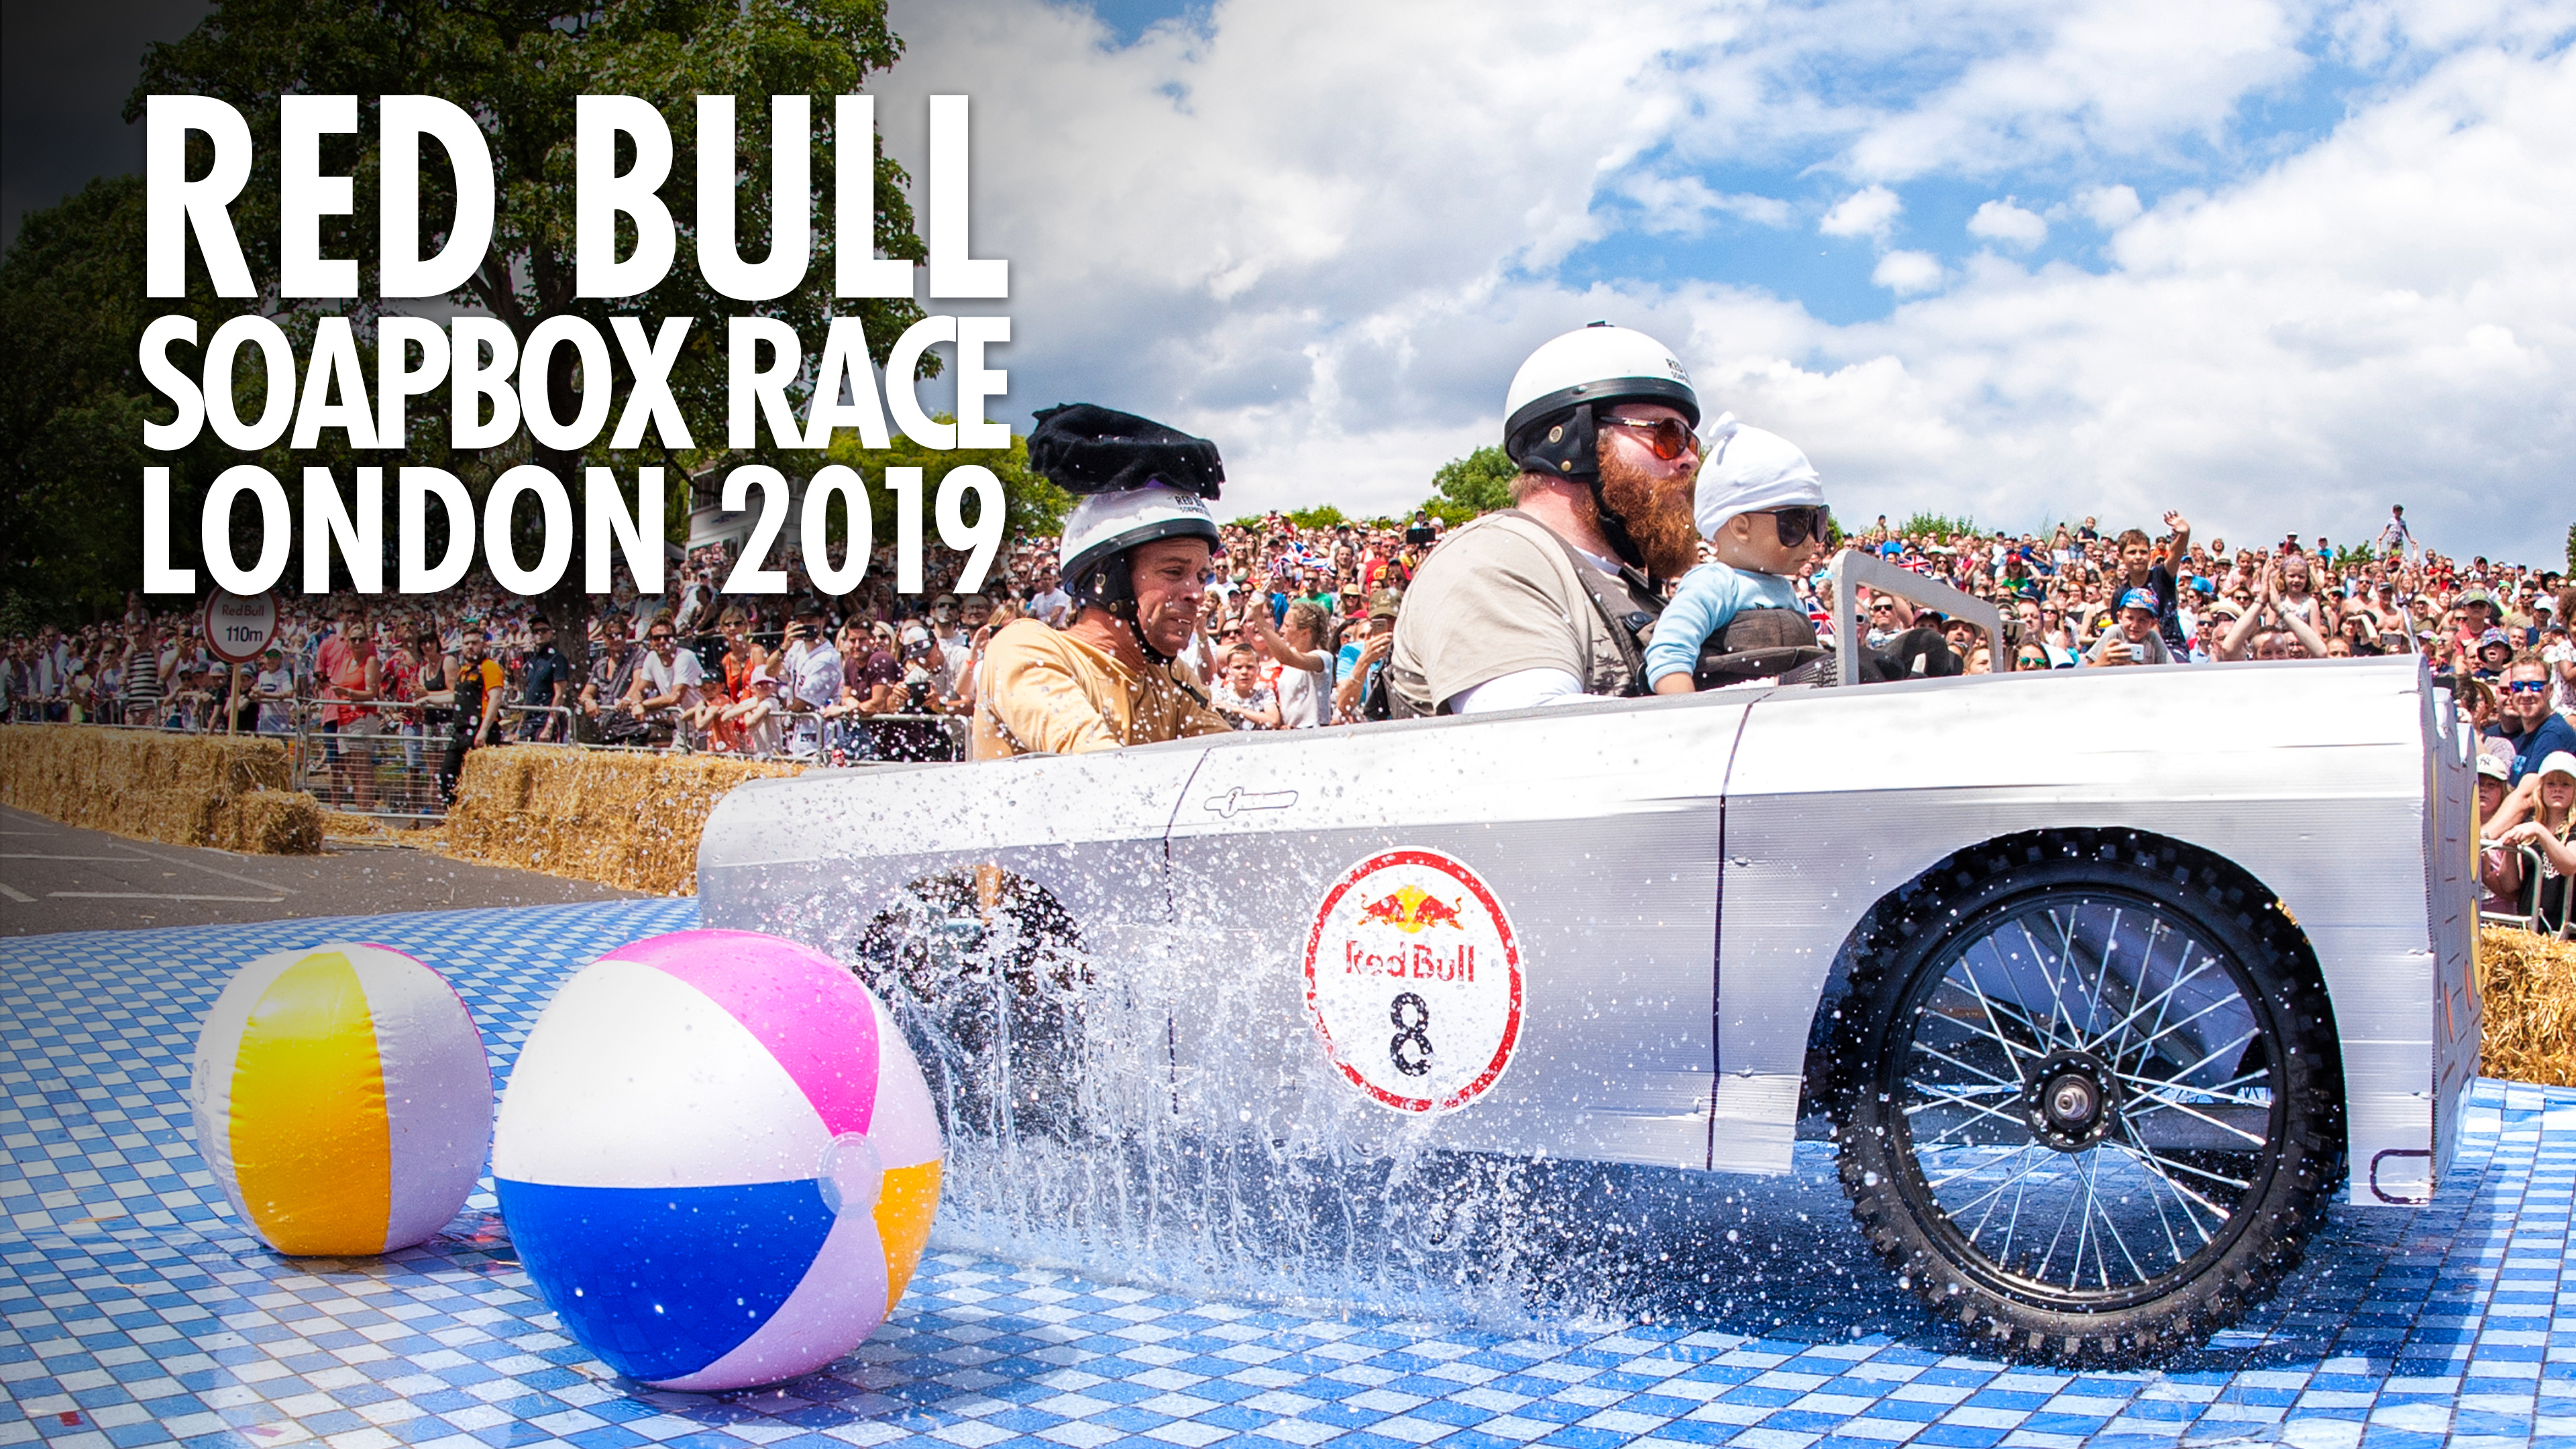 How to watch Red Bull Soapbox Race 2019: London - UKTV